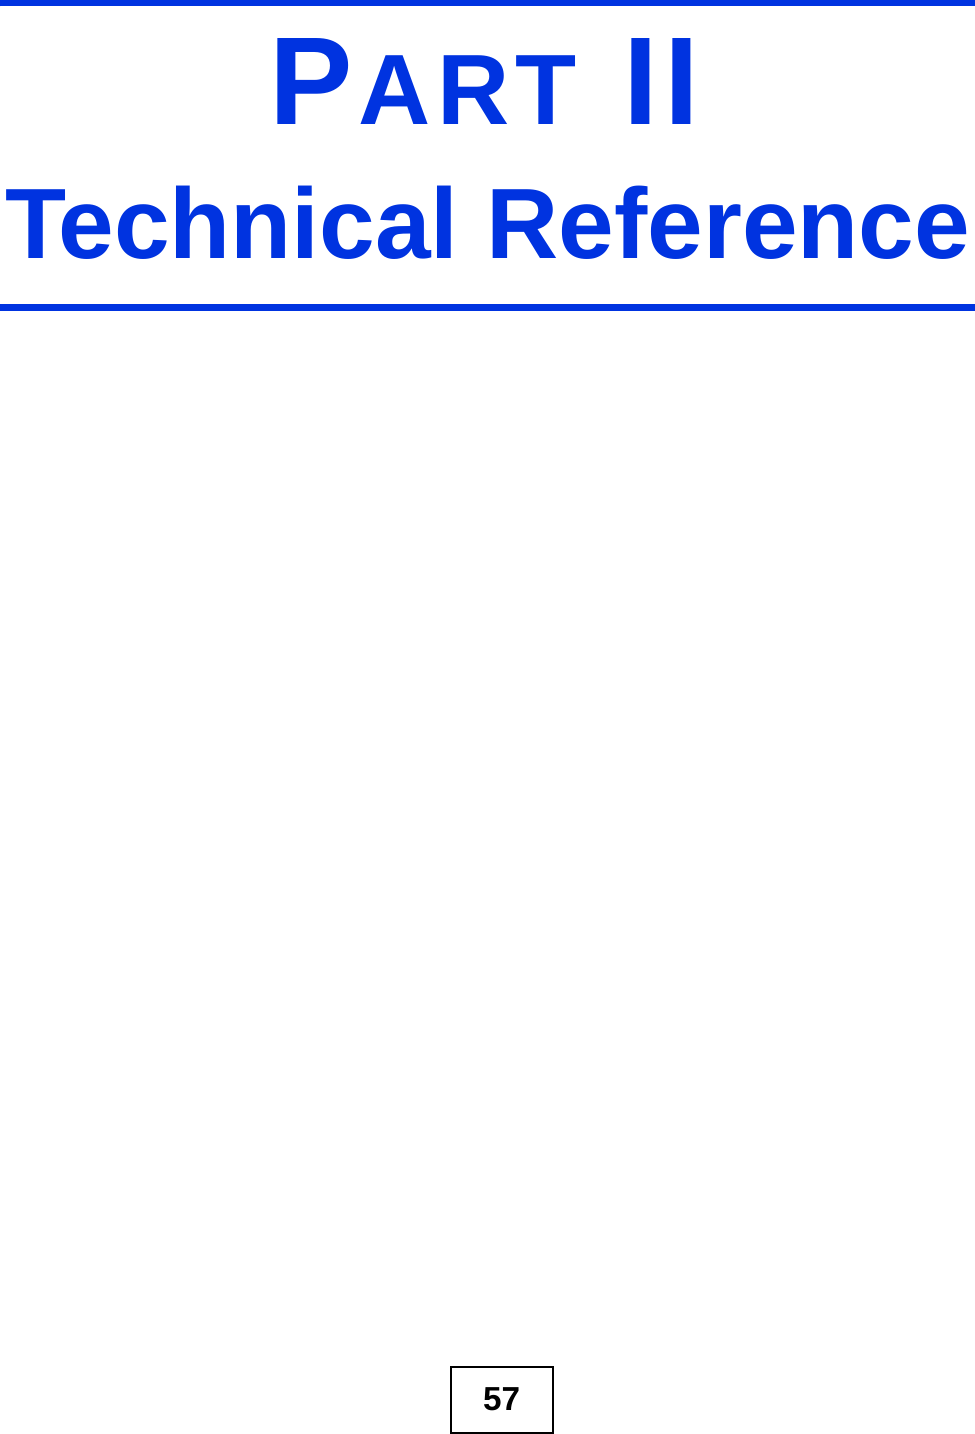 57PART IITechnical Reference